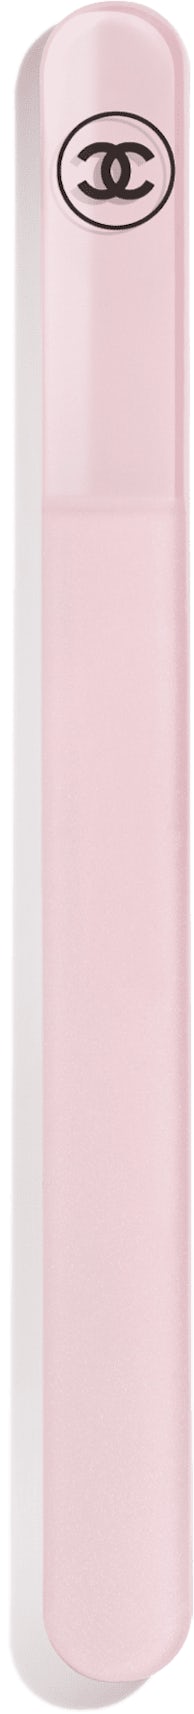 Chanel Codes Couleur Limited-Edition Nail File 111 - BALLERINA in